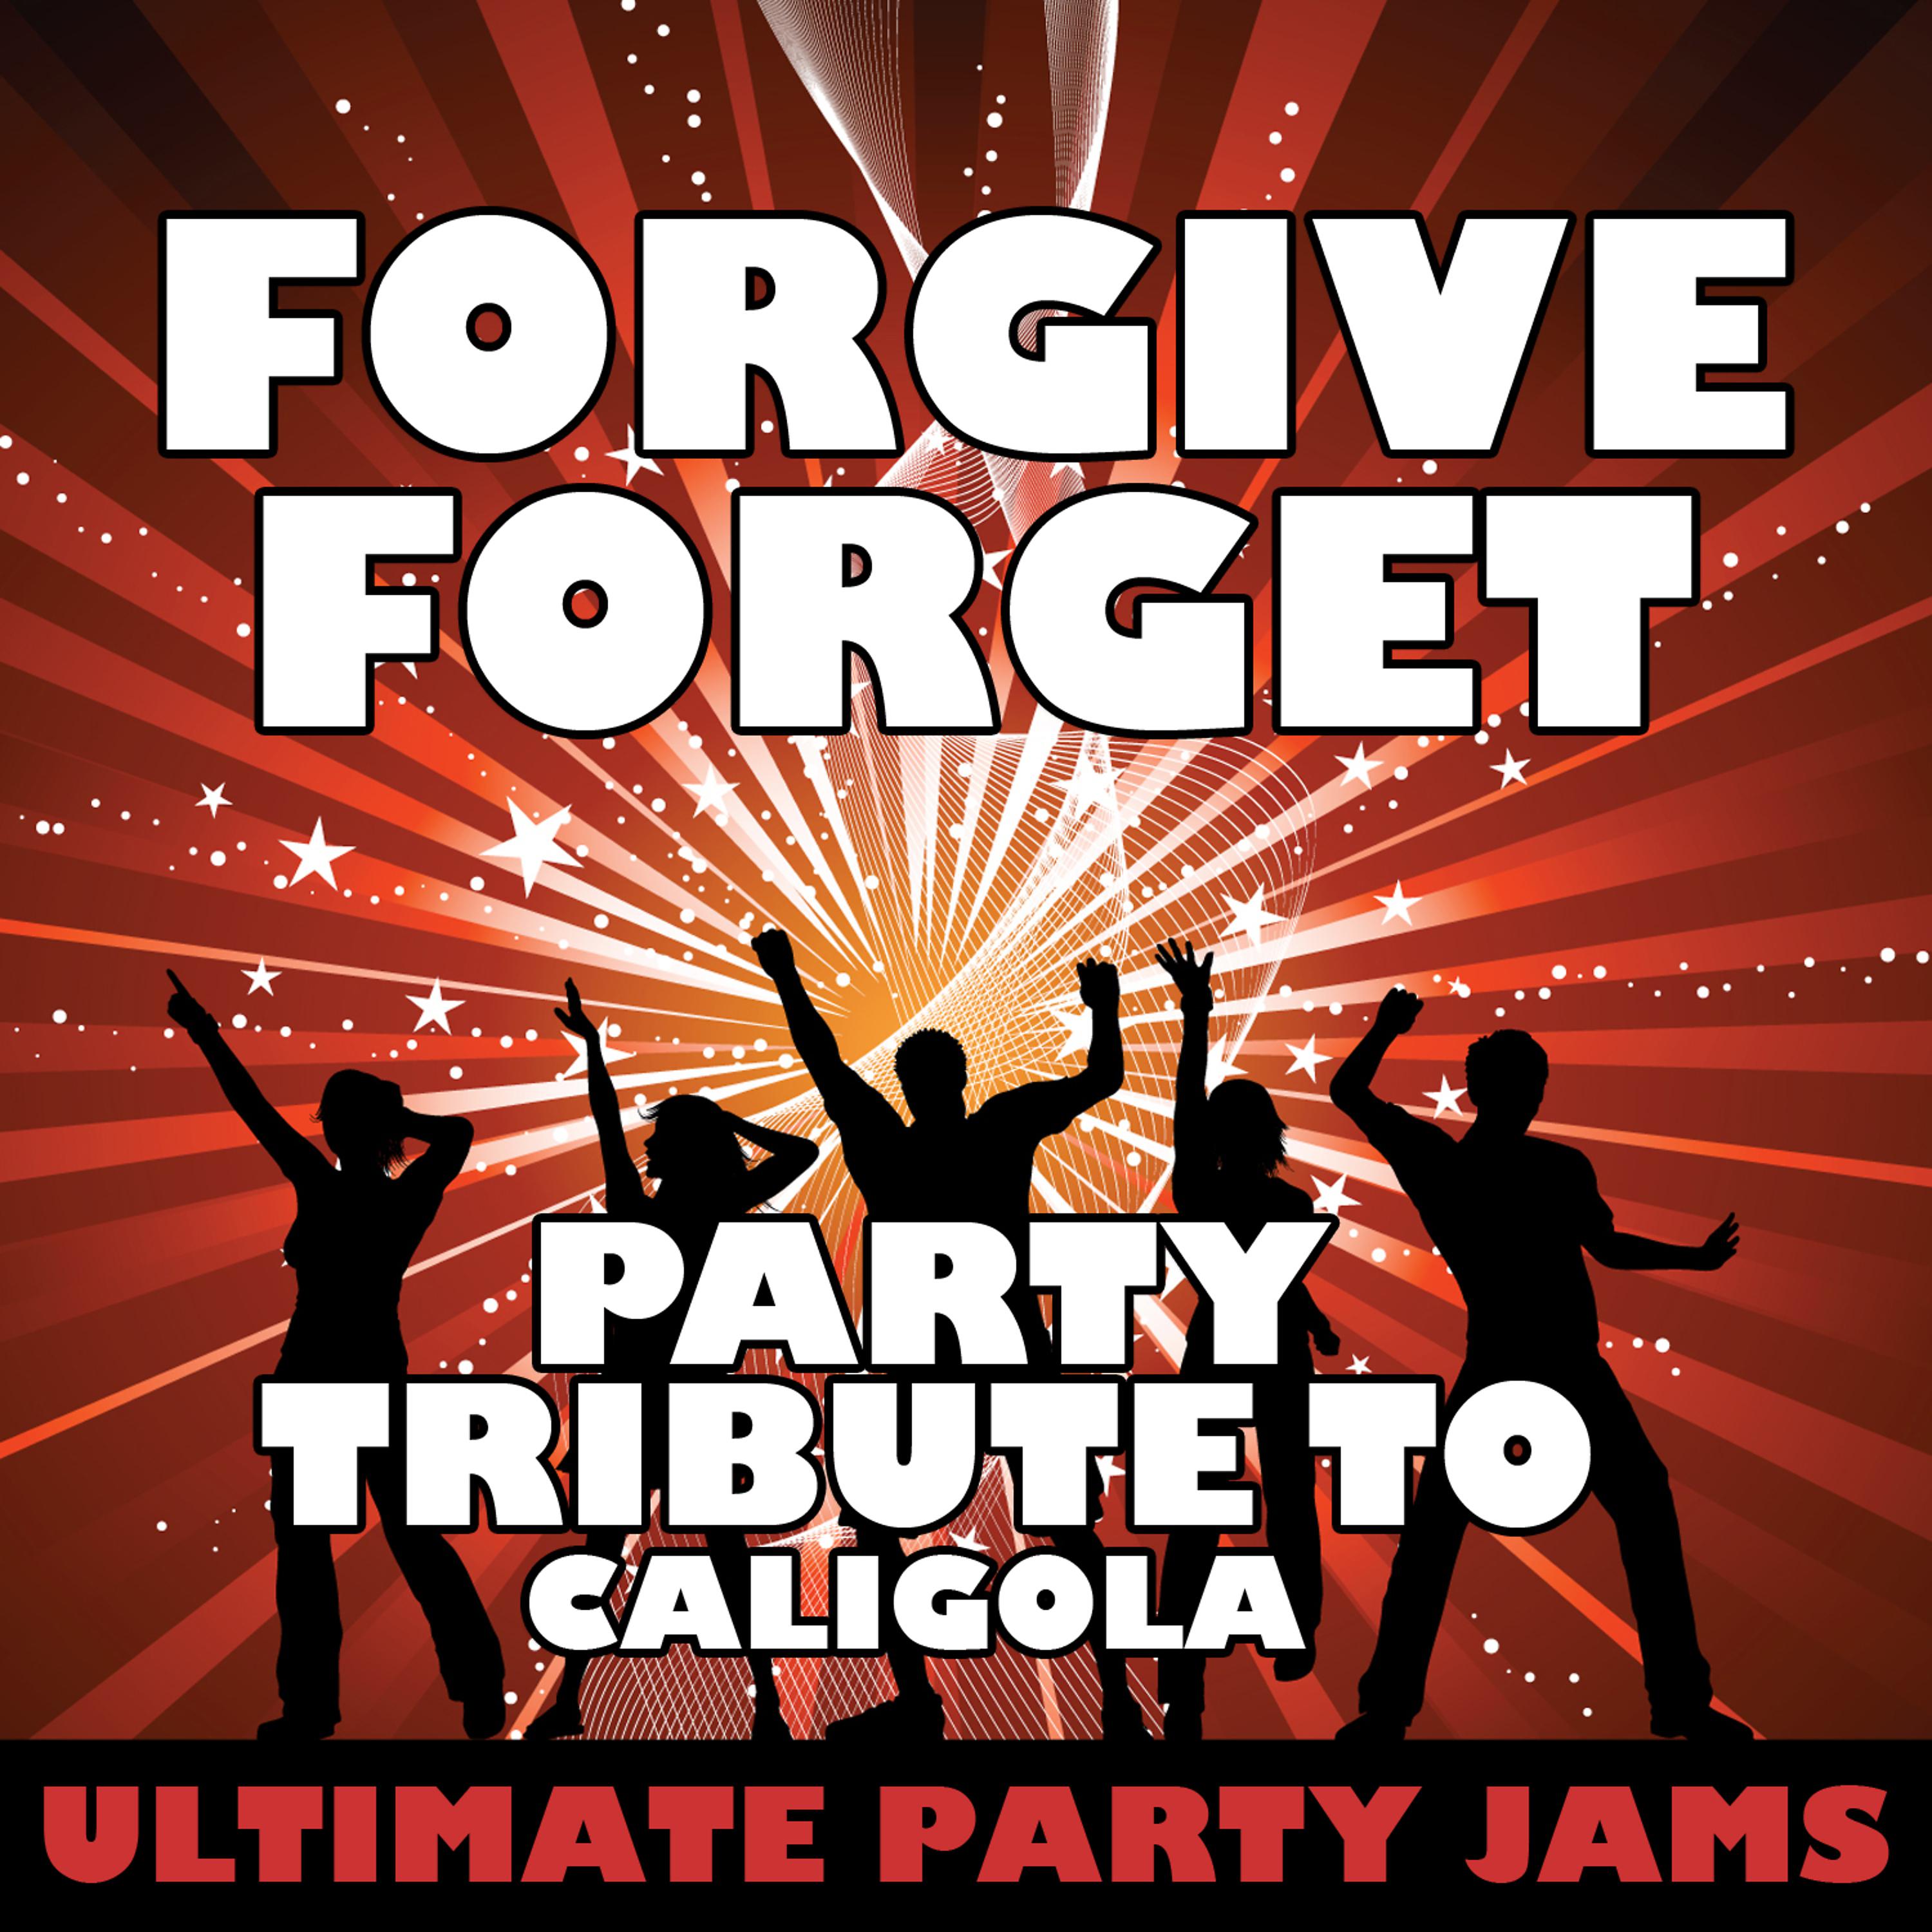 Постер альбома Forgive Forget (Party Tribute to Caligola)